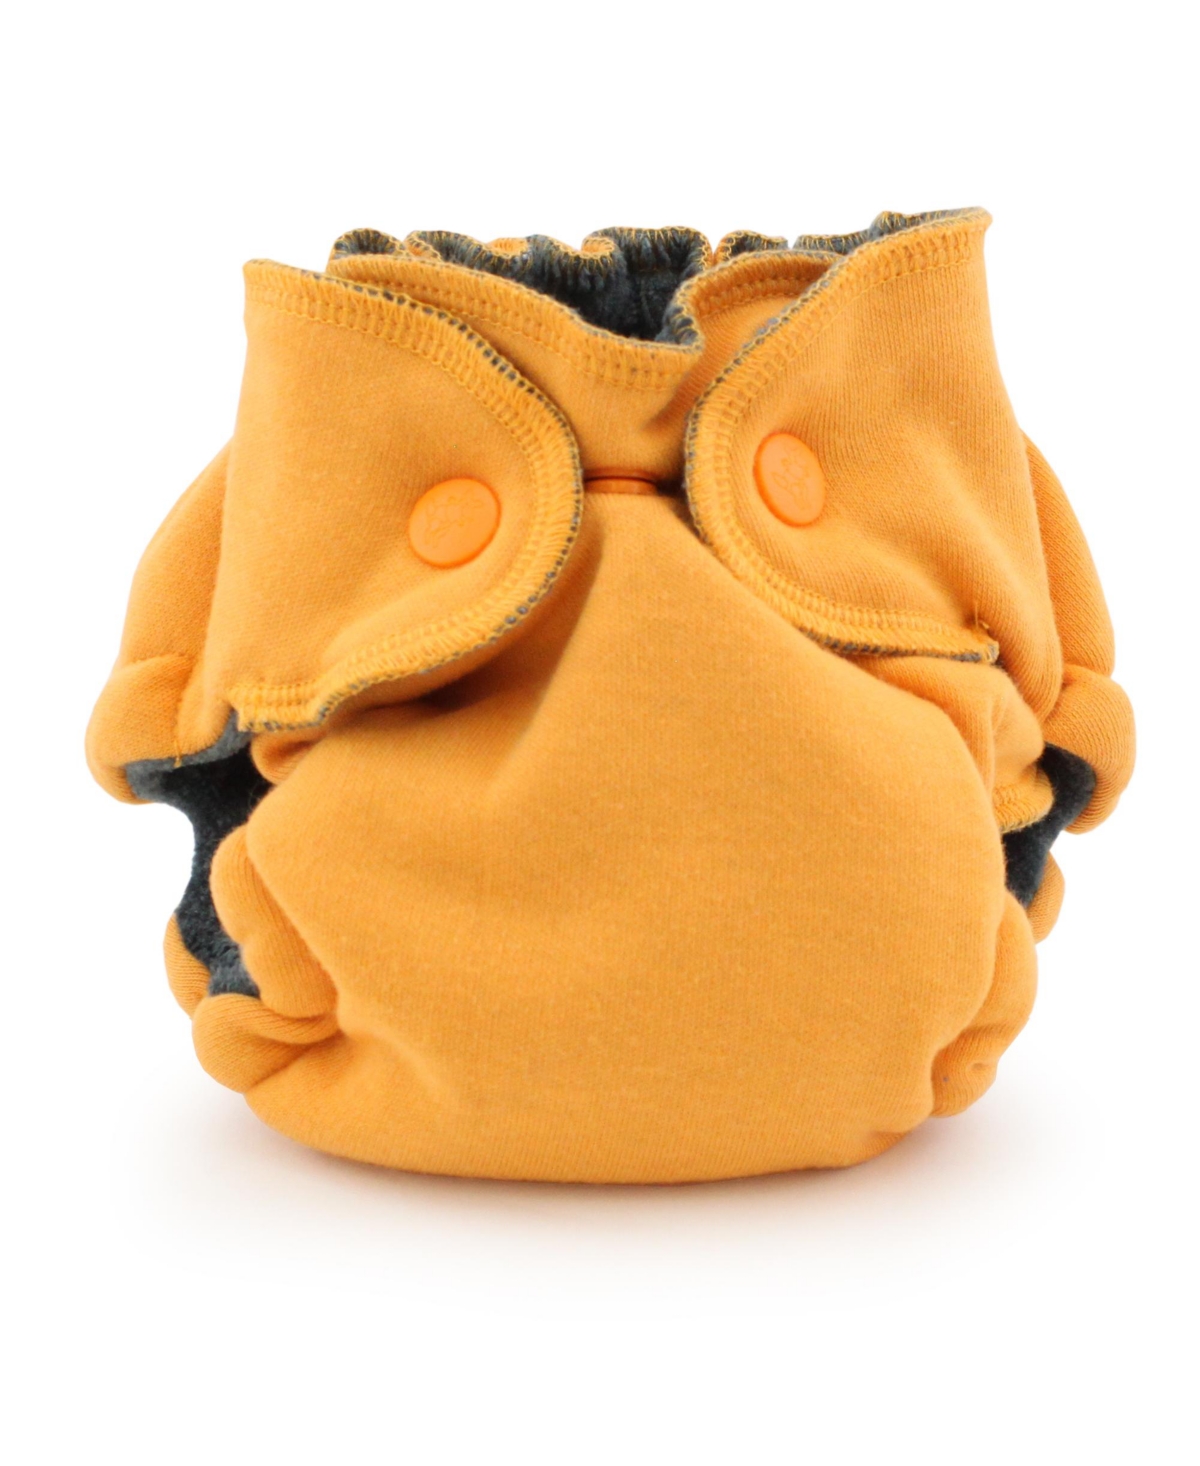 Kanga Care Babies' Ecoposh Obv (organic Rayon From Bamboo Velour) Newborn Aio (all-in-one) Fitted Cloth Diaper In Saffron